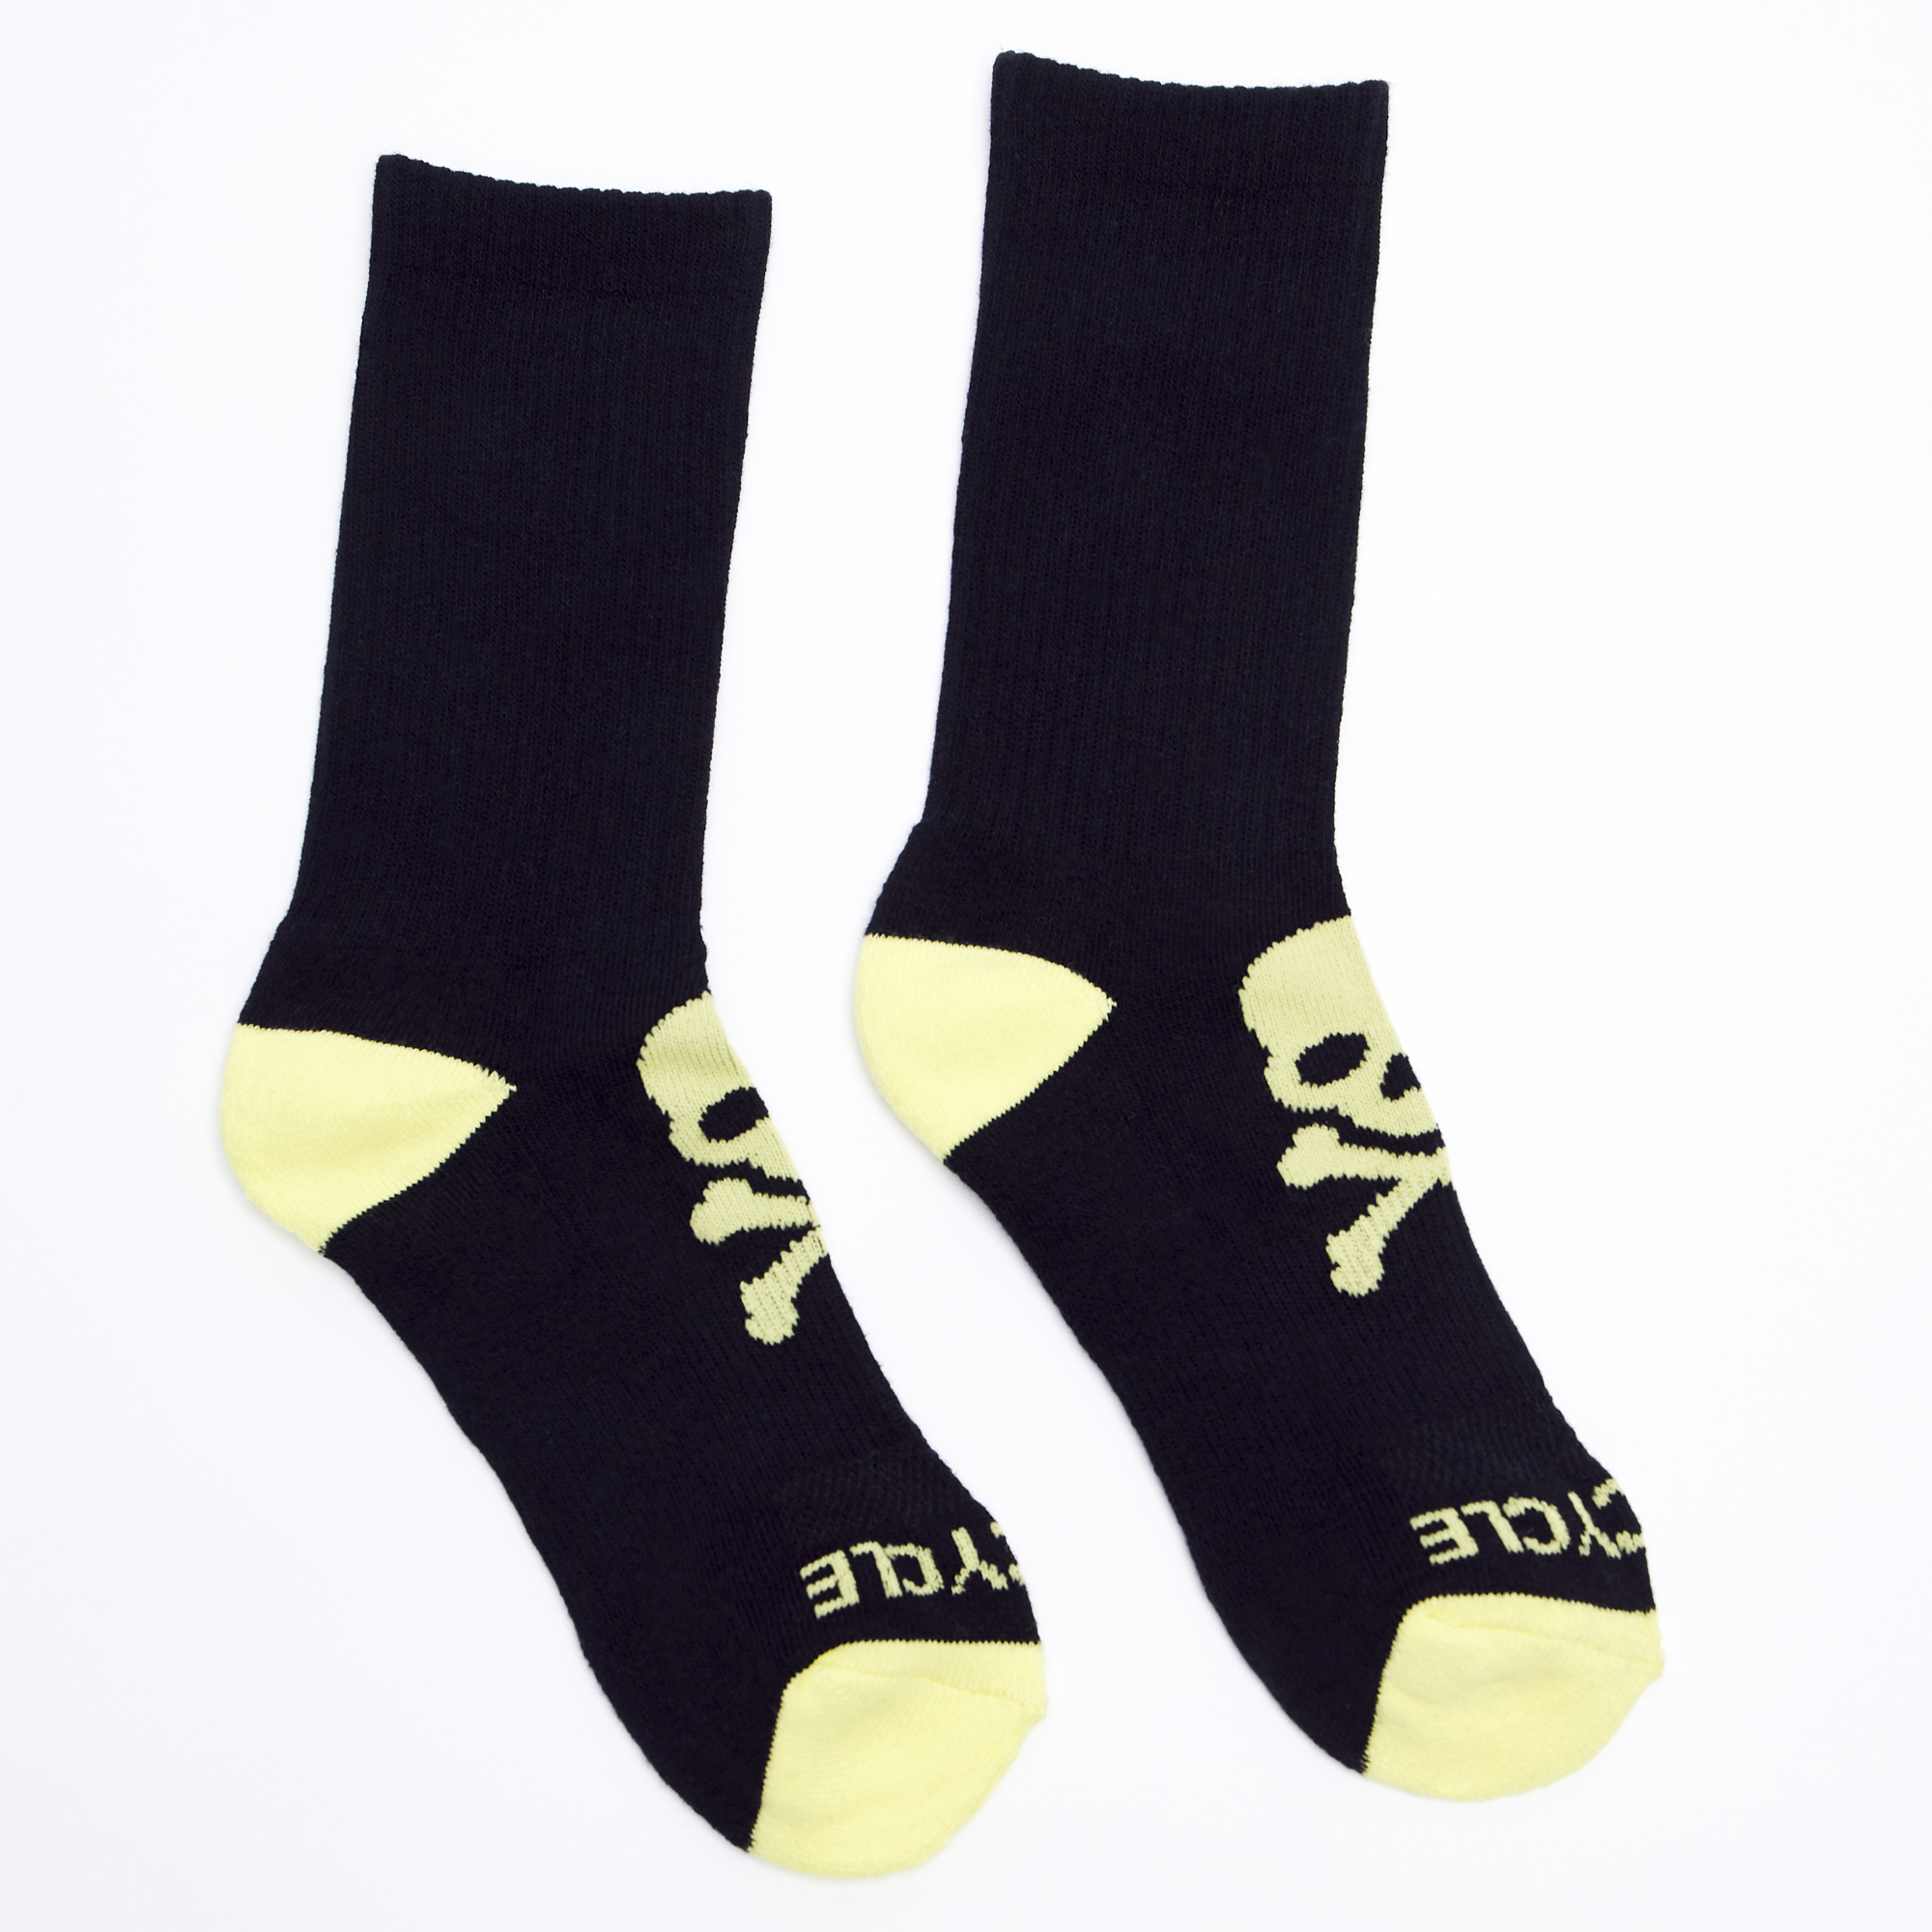 Soul by SoulCycle Black/Elfin Yellow Calf Socks - SoulCycle Shop